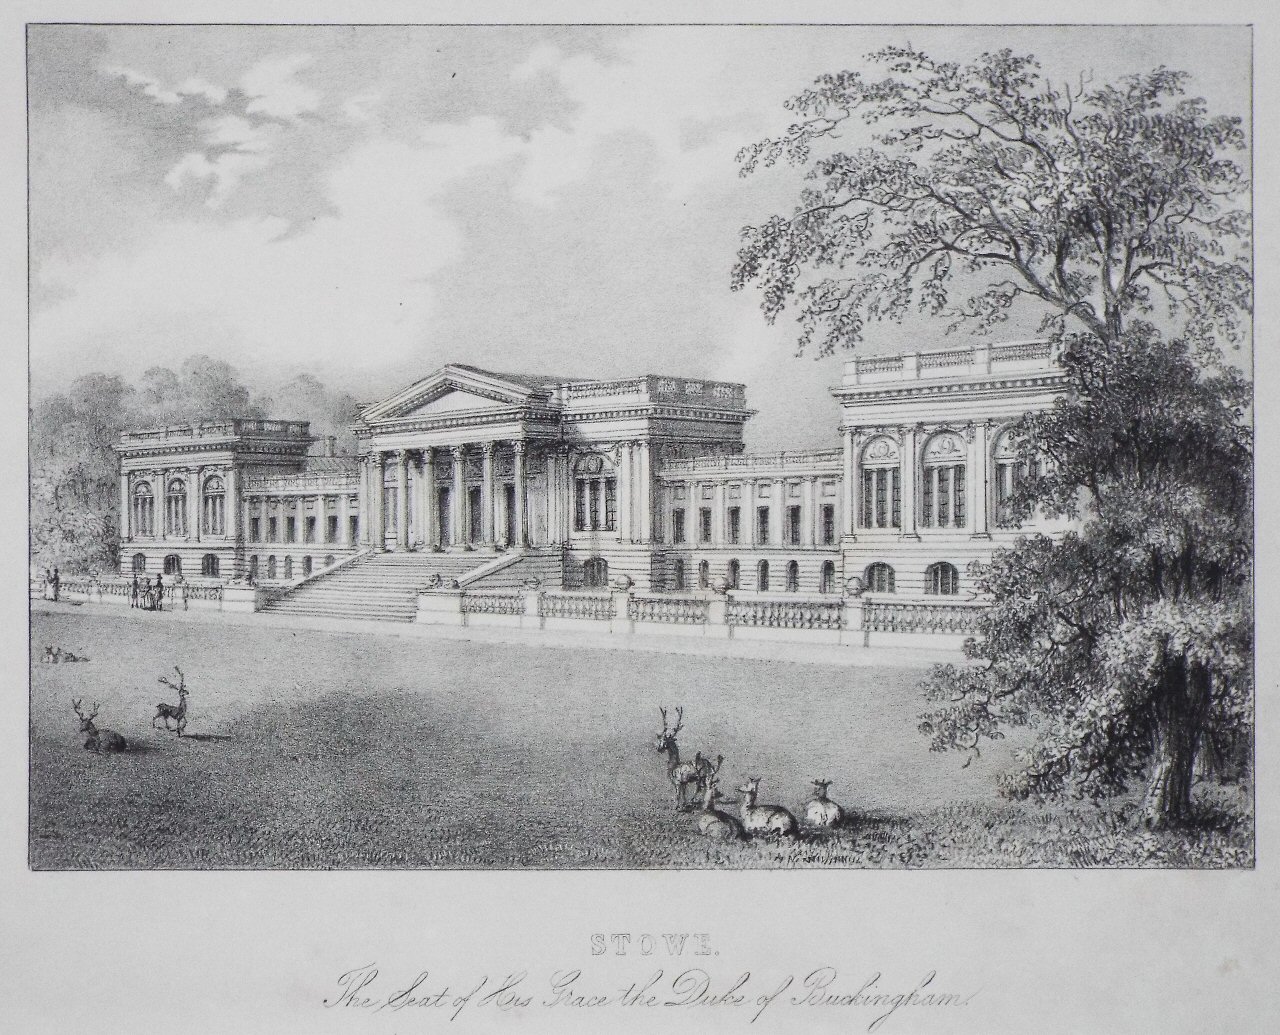 Lithograph - Stowe. The Seat of His Grace the Duke of Buckingham.